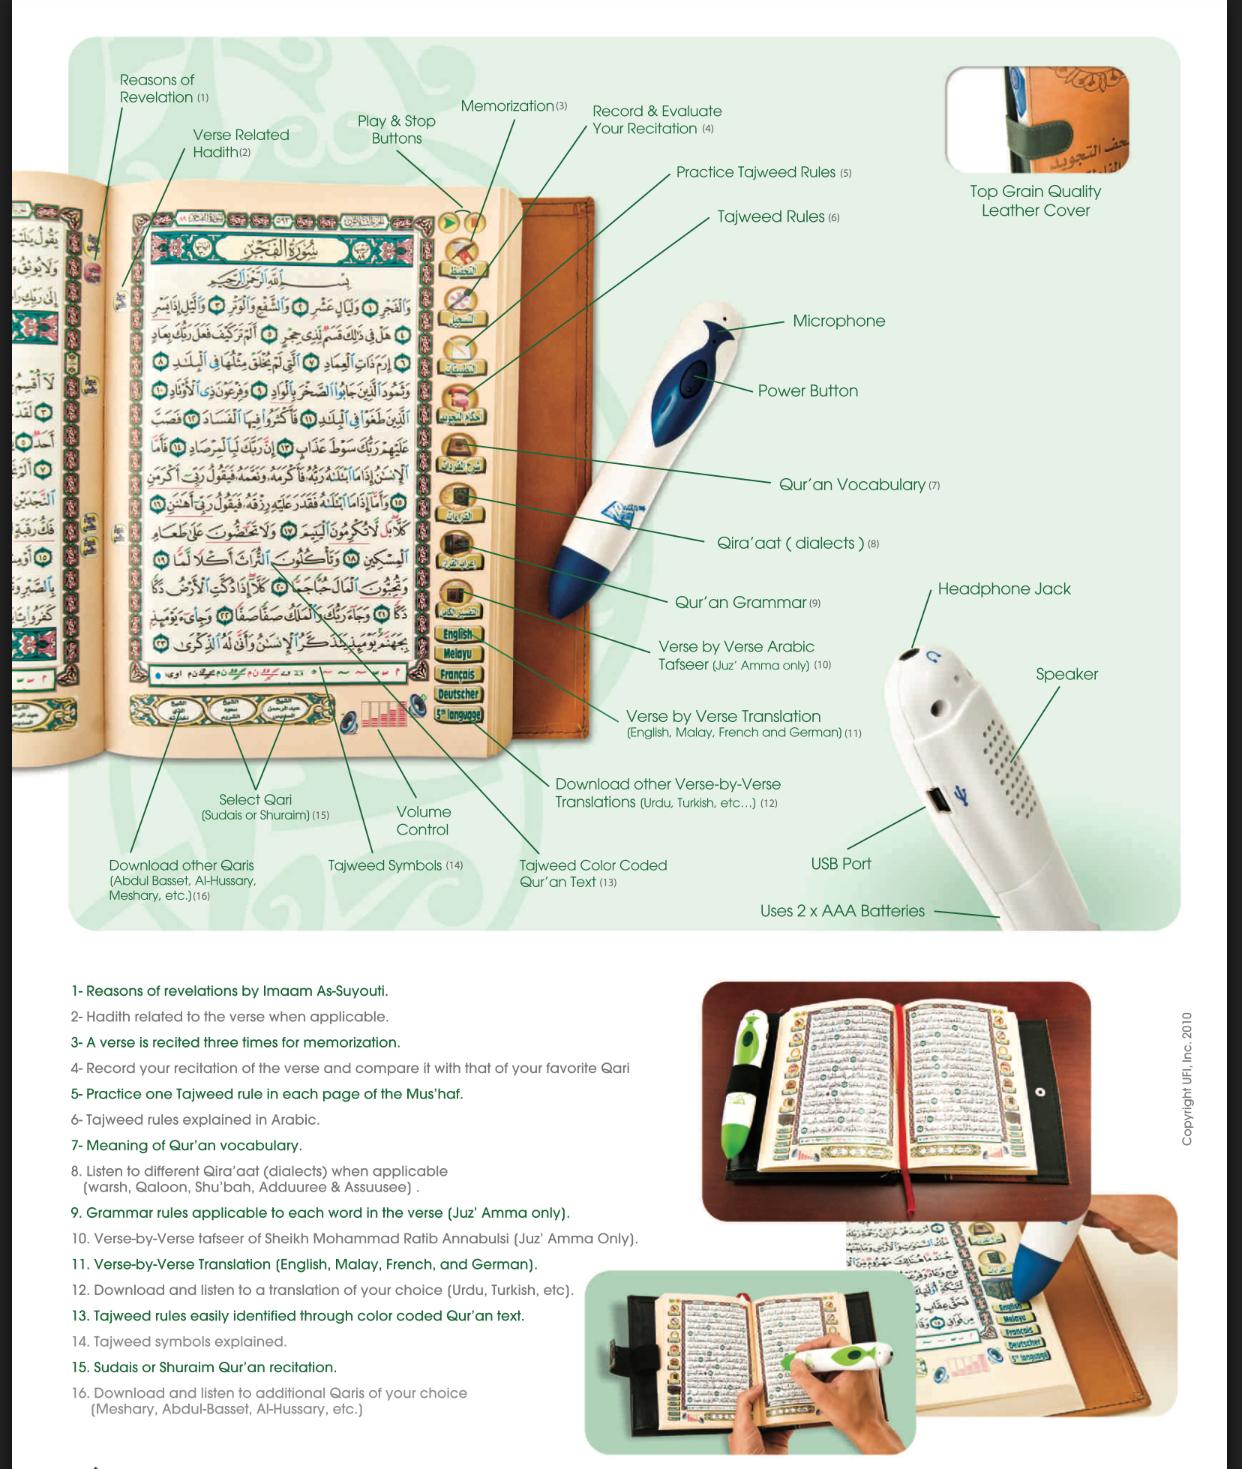 Touch and Learn Digital Qur'an and Pen (8" X10") Leather cover - 1PaysLess.com